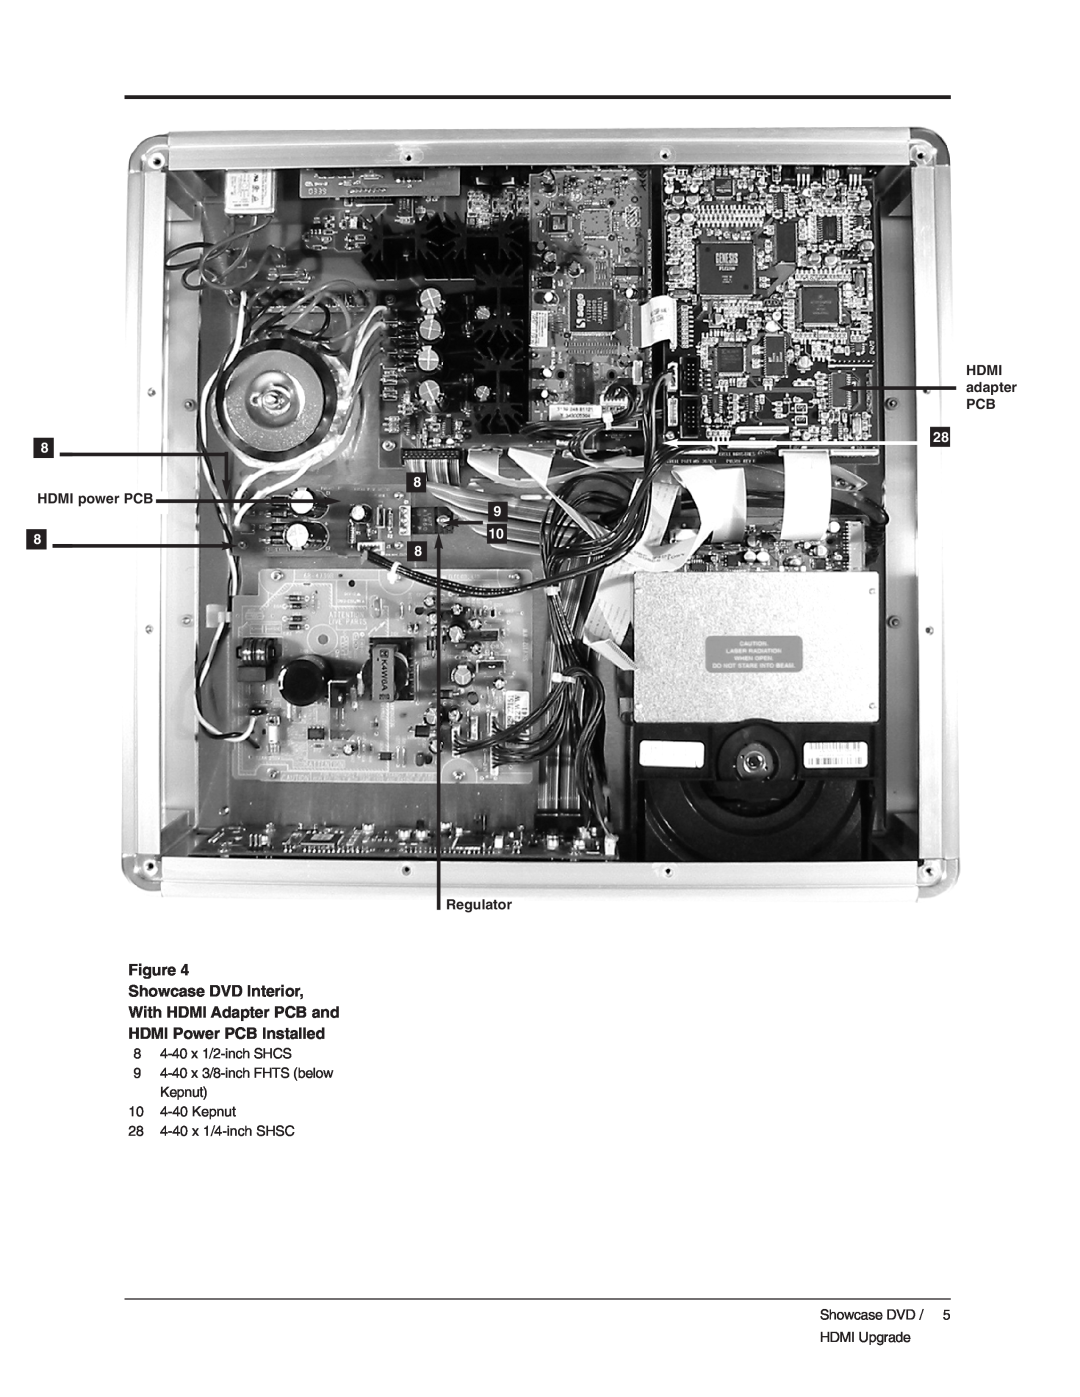 Krell Industries DVD Player Showcase DVD Interior With HDMI Adapter PCB and, HDMI Power PCB Installed, HDMI power PCB 